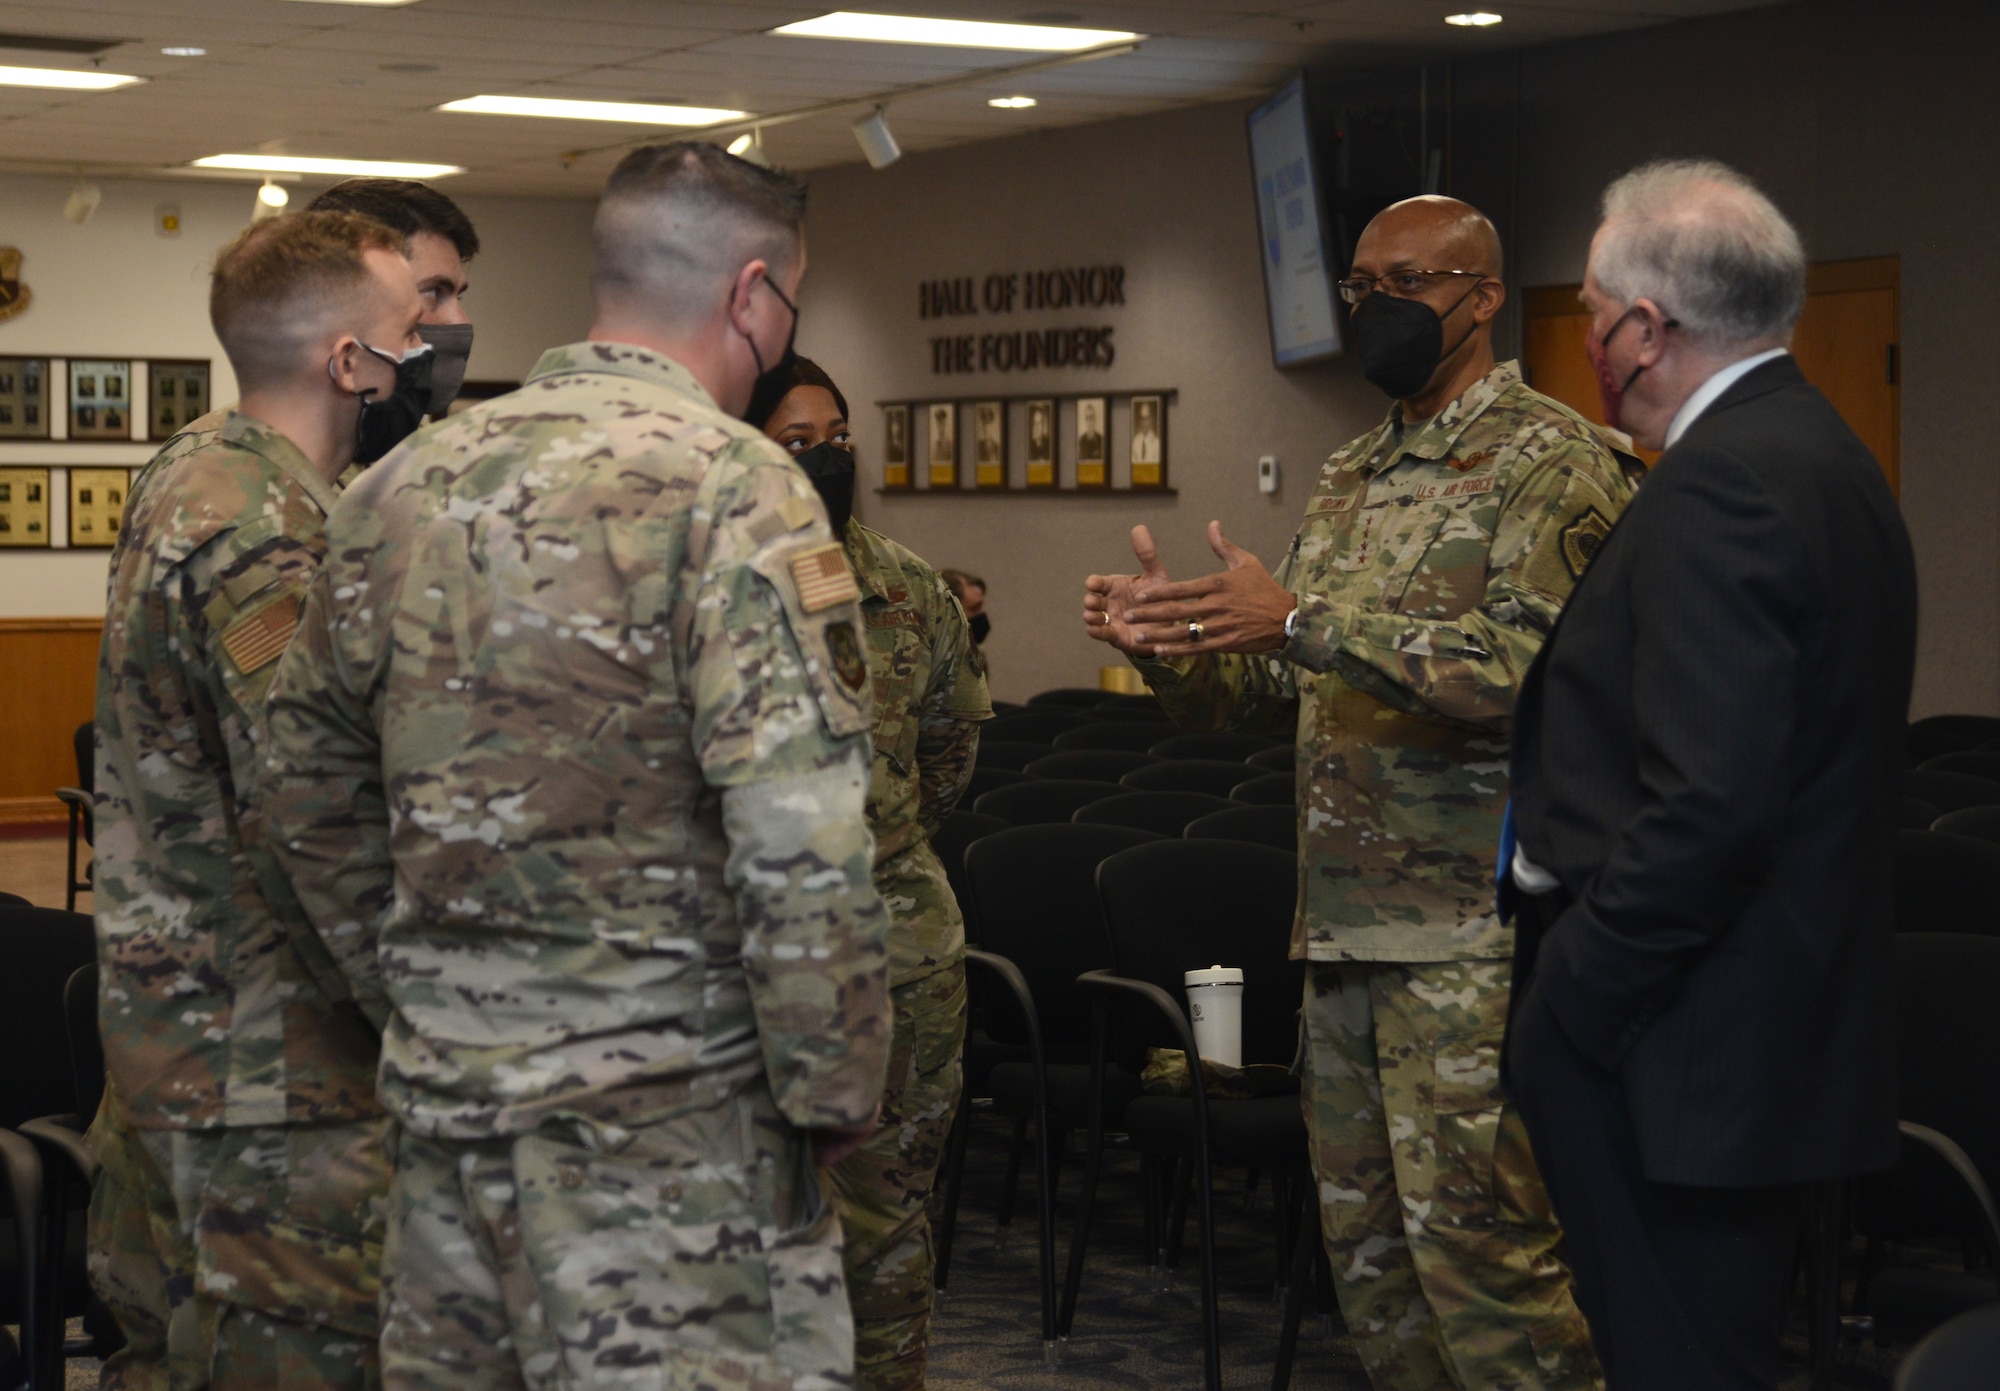 Sixteenth Air Force (Air Forces Cyber) Airmen speak with Secretary of the Air Force Frank Kendall and Air Force Chief of Staff Gen. CQ Brown, Jr., during their visit Feb. 2, 2022.